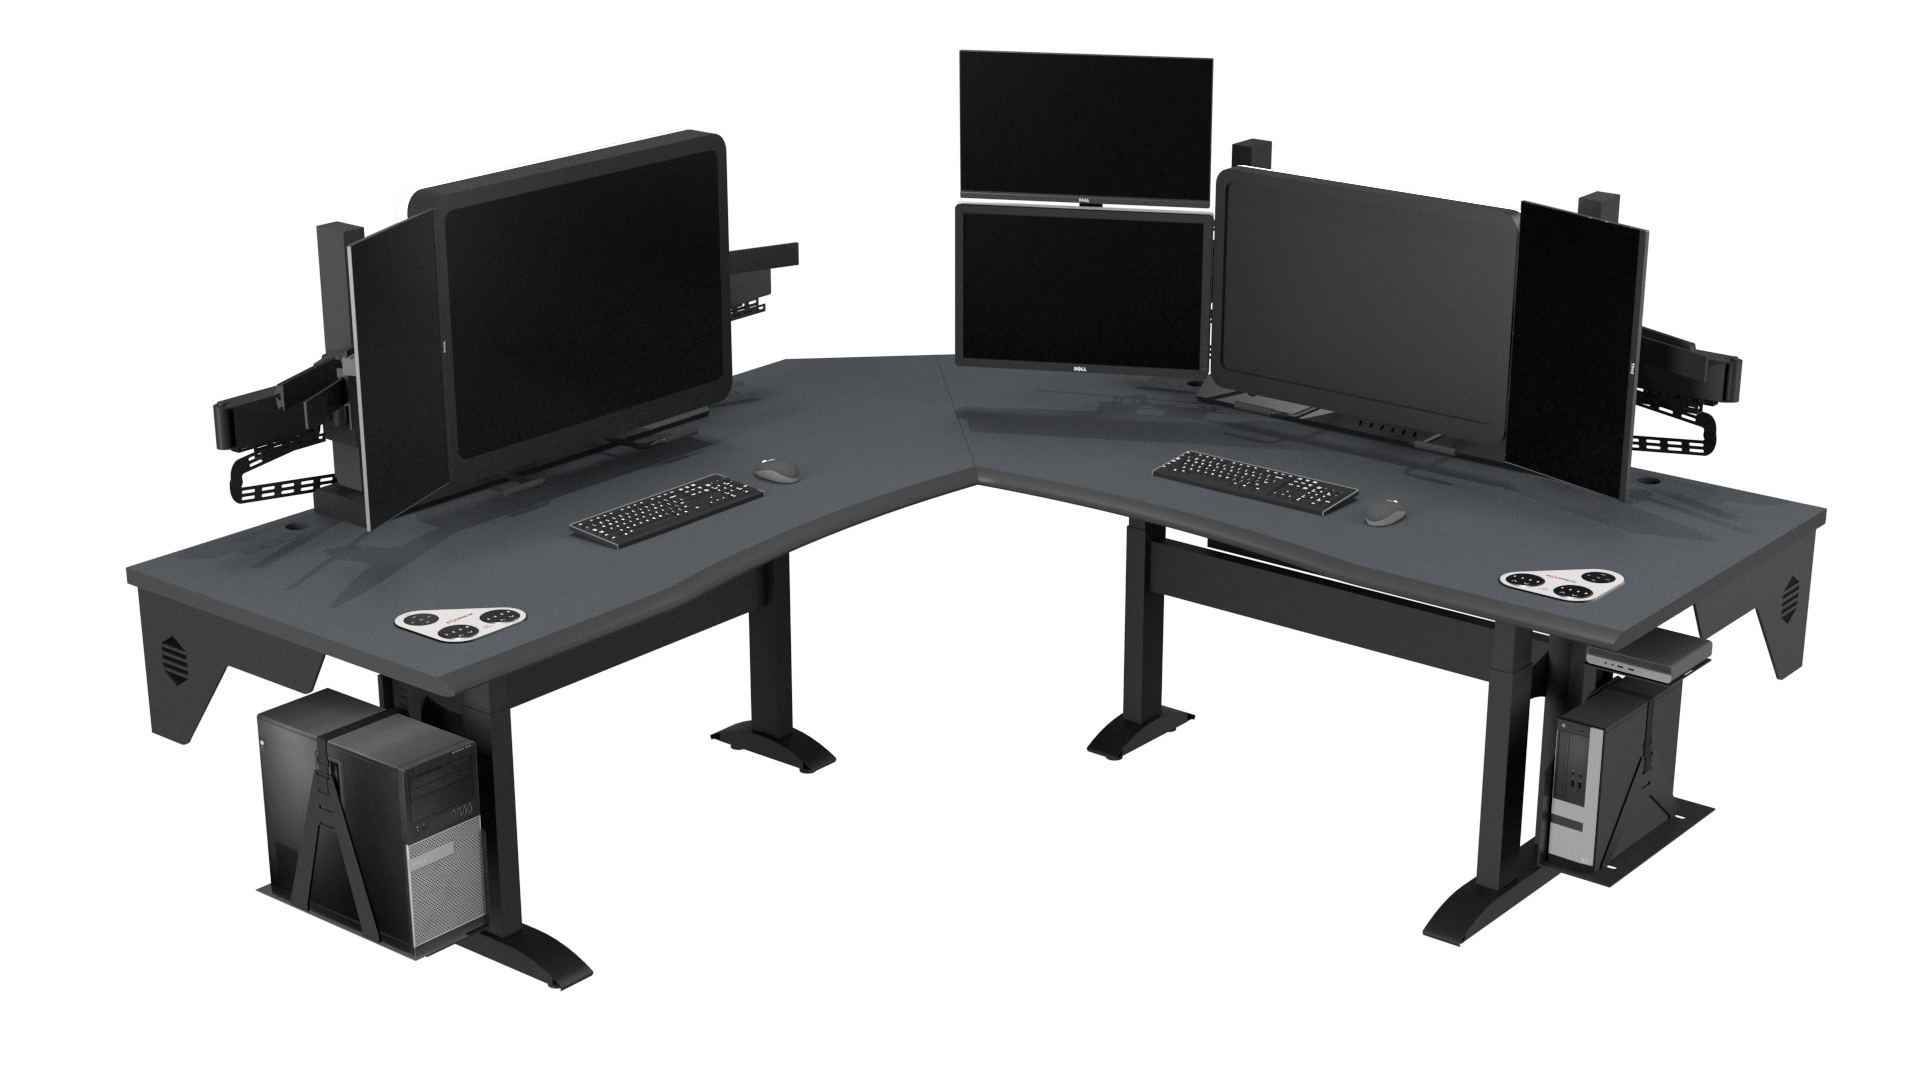 ergonomic workspaces for computer desk with a few monitors and keyboard